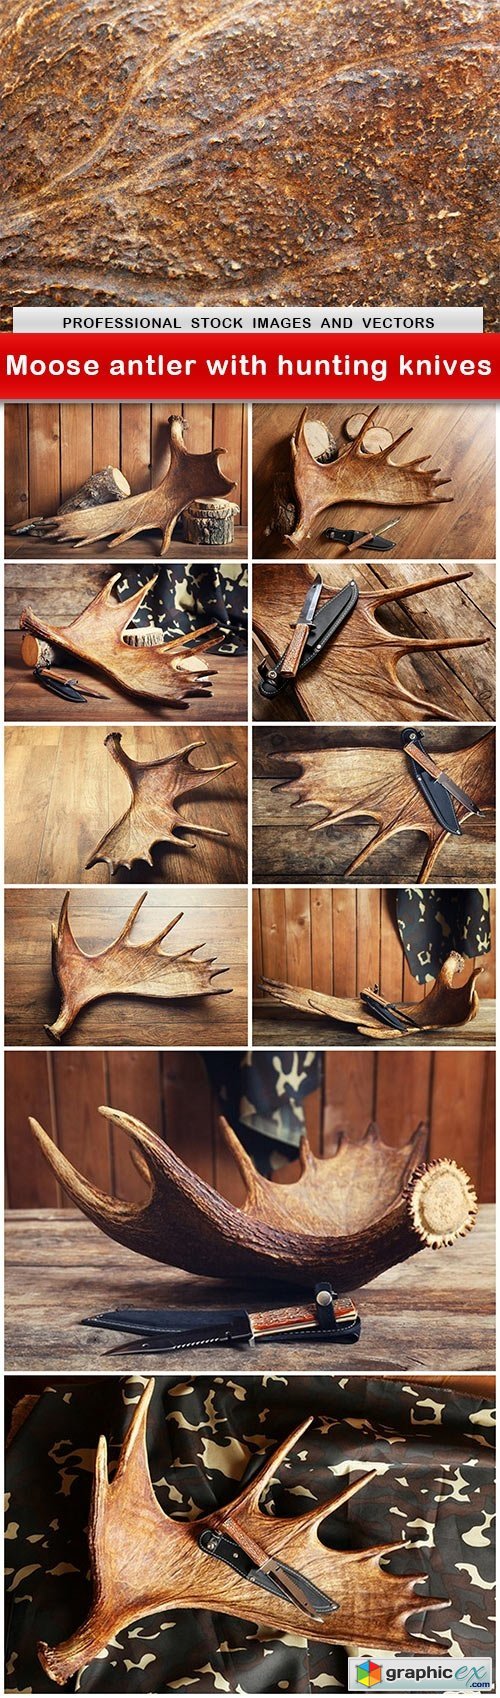 Moose antler with hunting knives - 11 UHQ JPEG